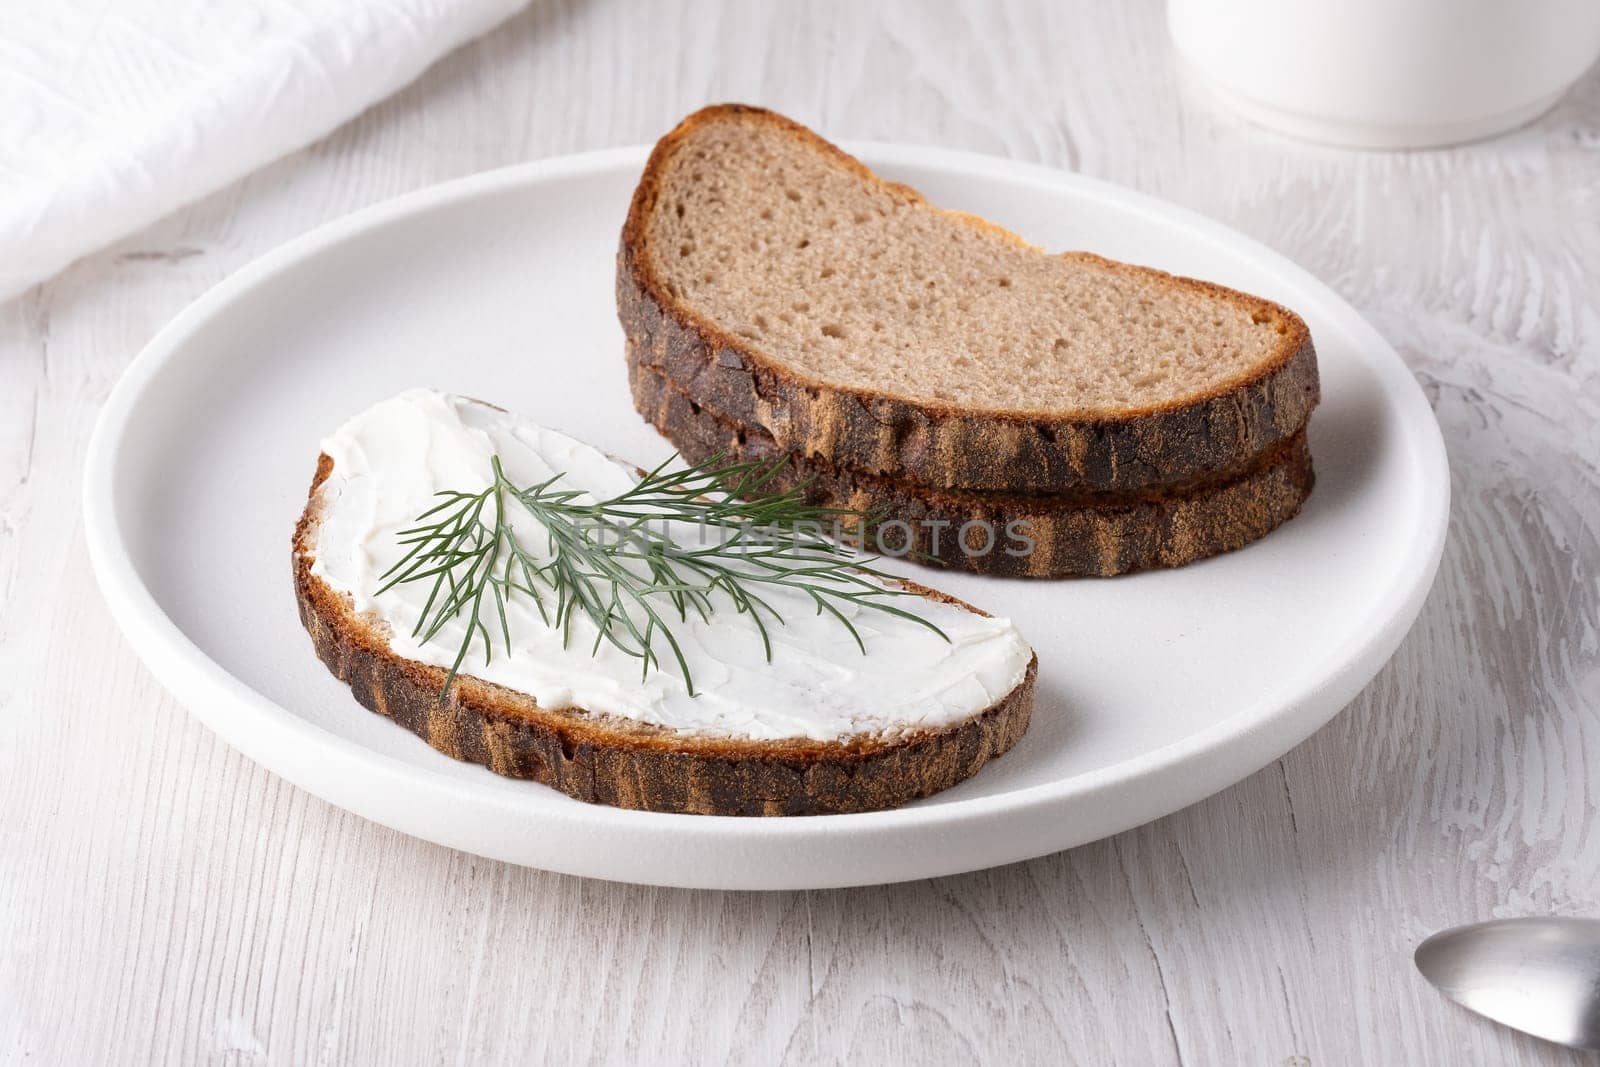 Sandwiches with soft curd cheese on a white wooden table.